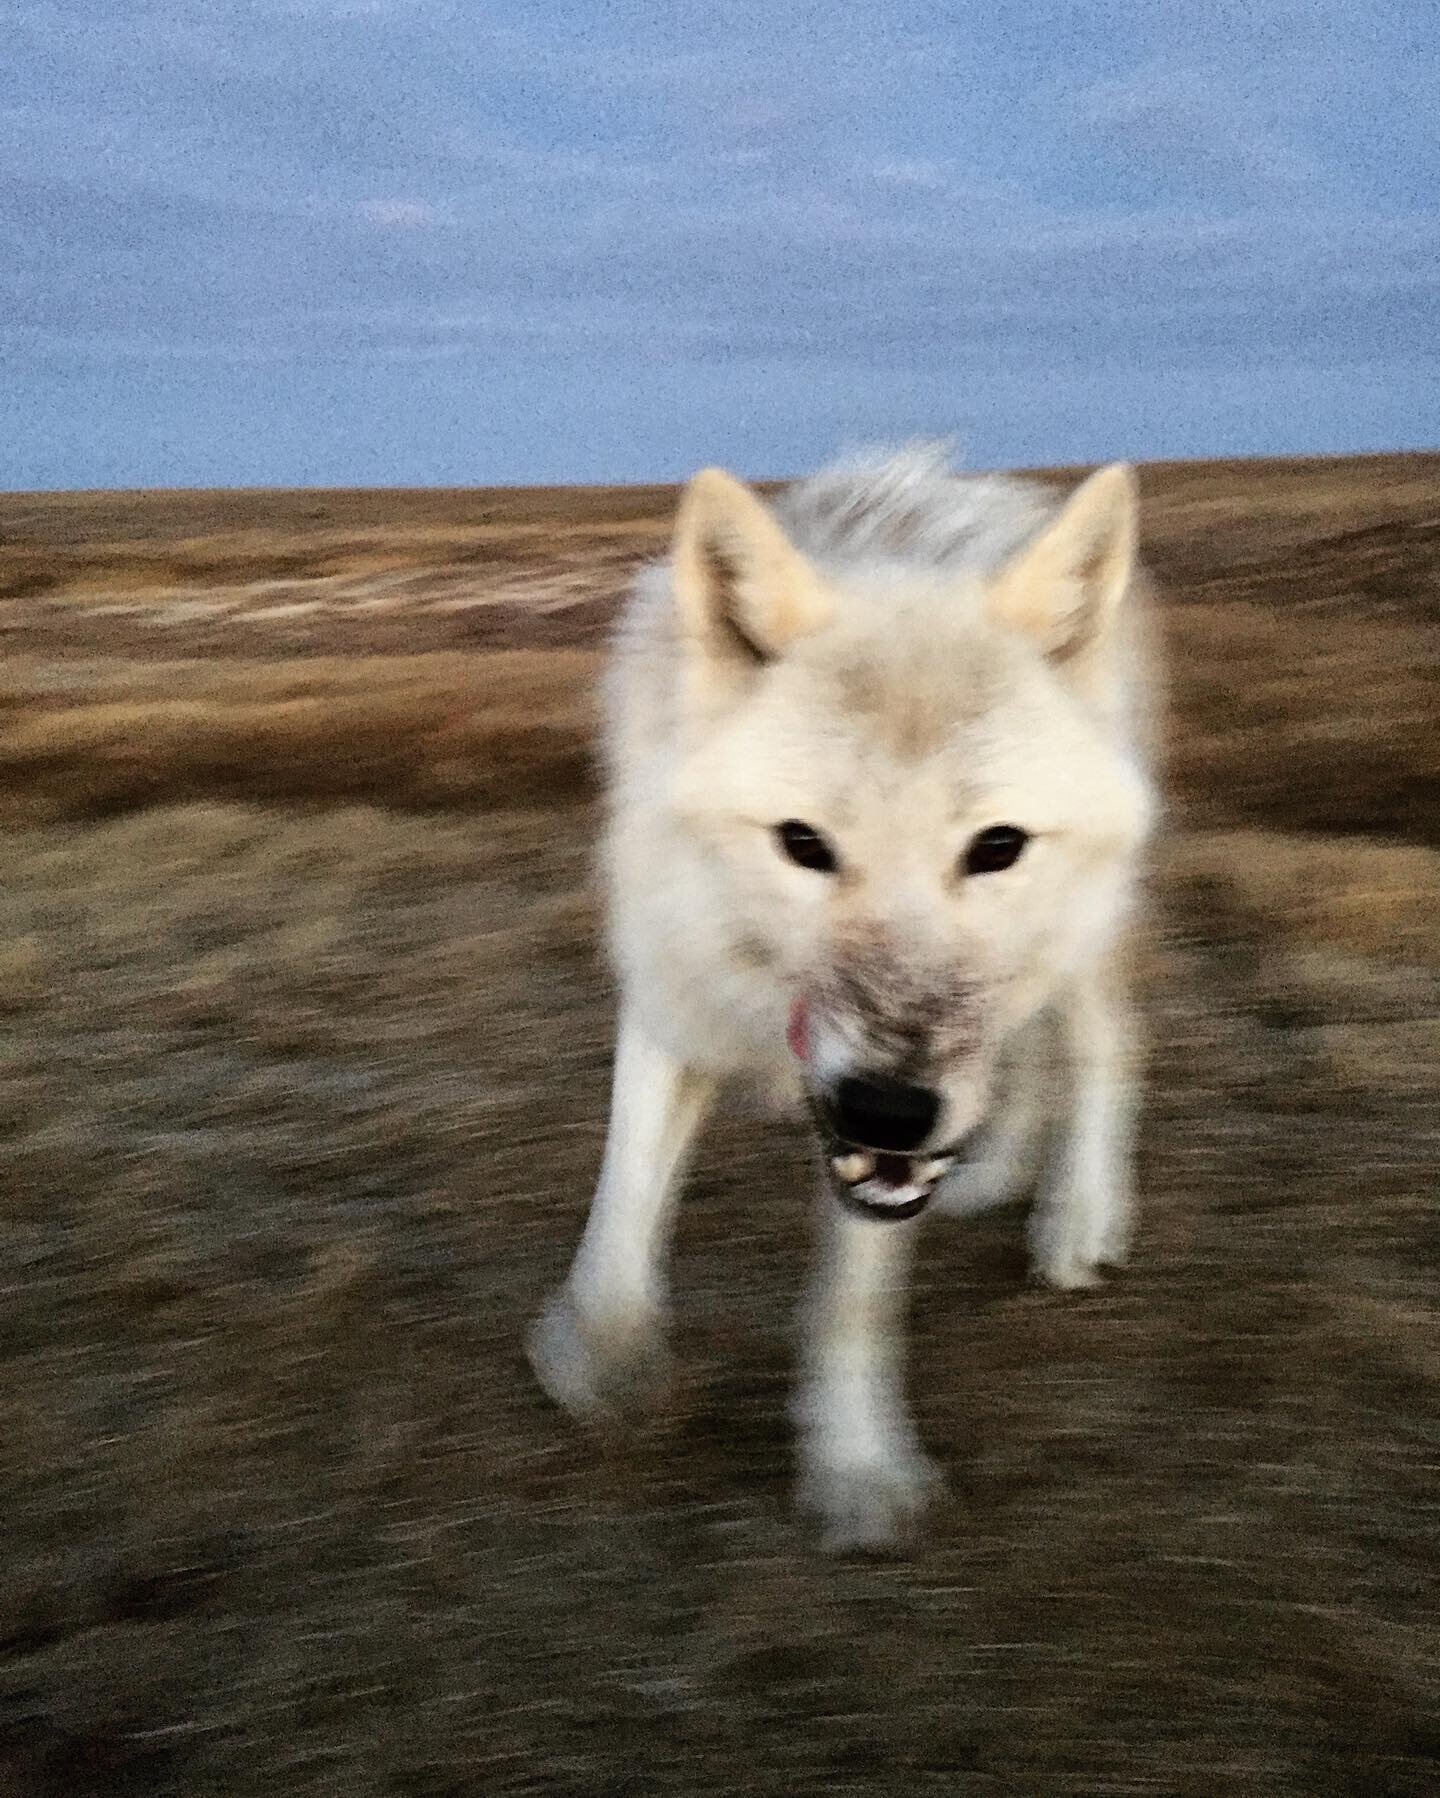 Three years ago today this guy came in for a closer inspection. Arctic wolves generally live short, intense lives. I wonder if he&rsquo;s still up there, roaming.
&mdash;
#nunavut #ellesmereisland #arcticwolf #wolf